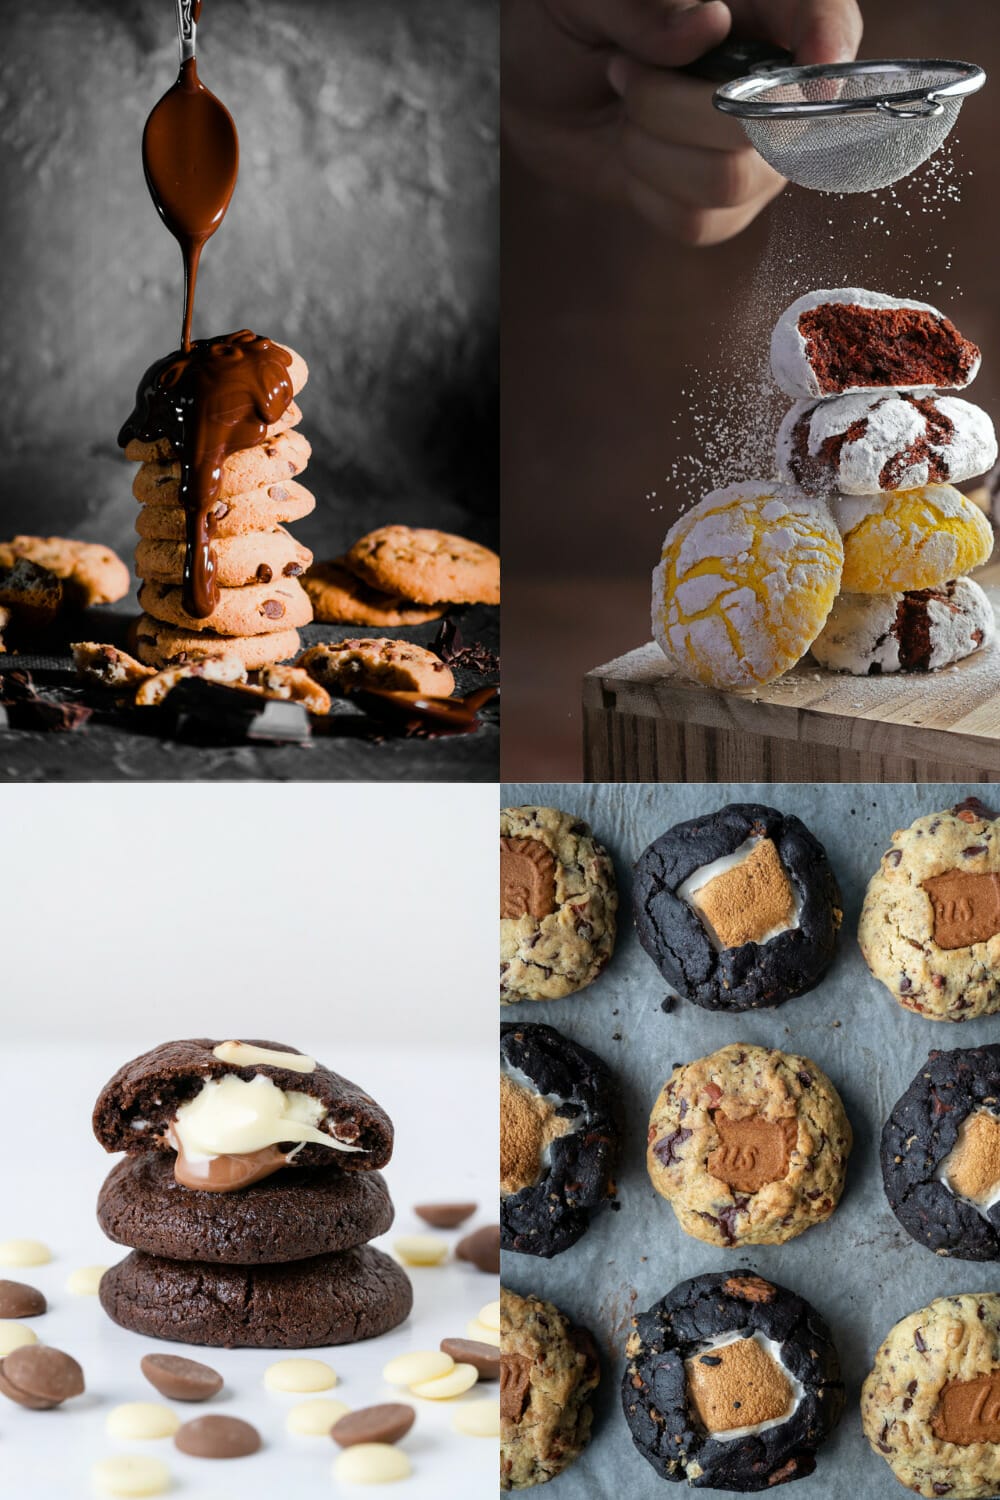 Why are my cookies cakey? 9 hacks for avoiding cakey cookies via @nofusskitchen